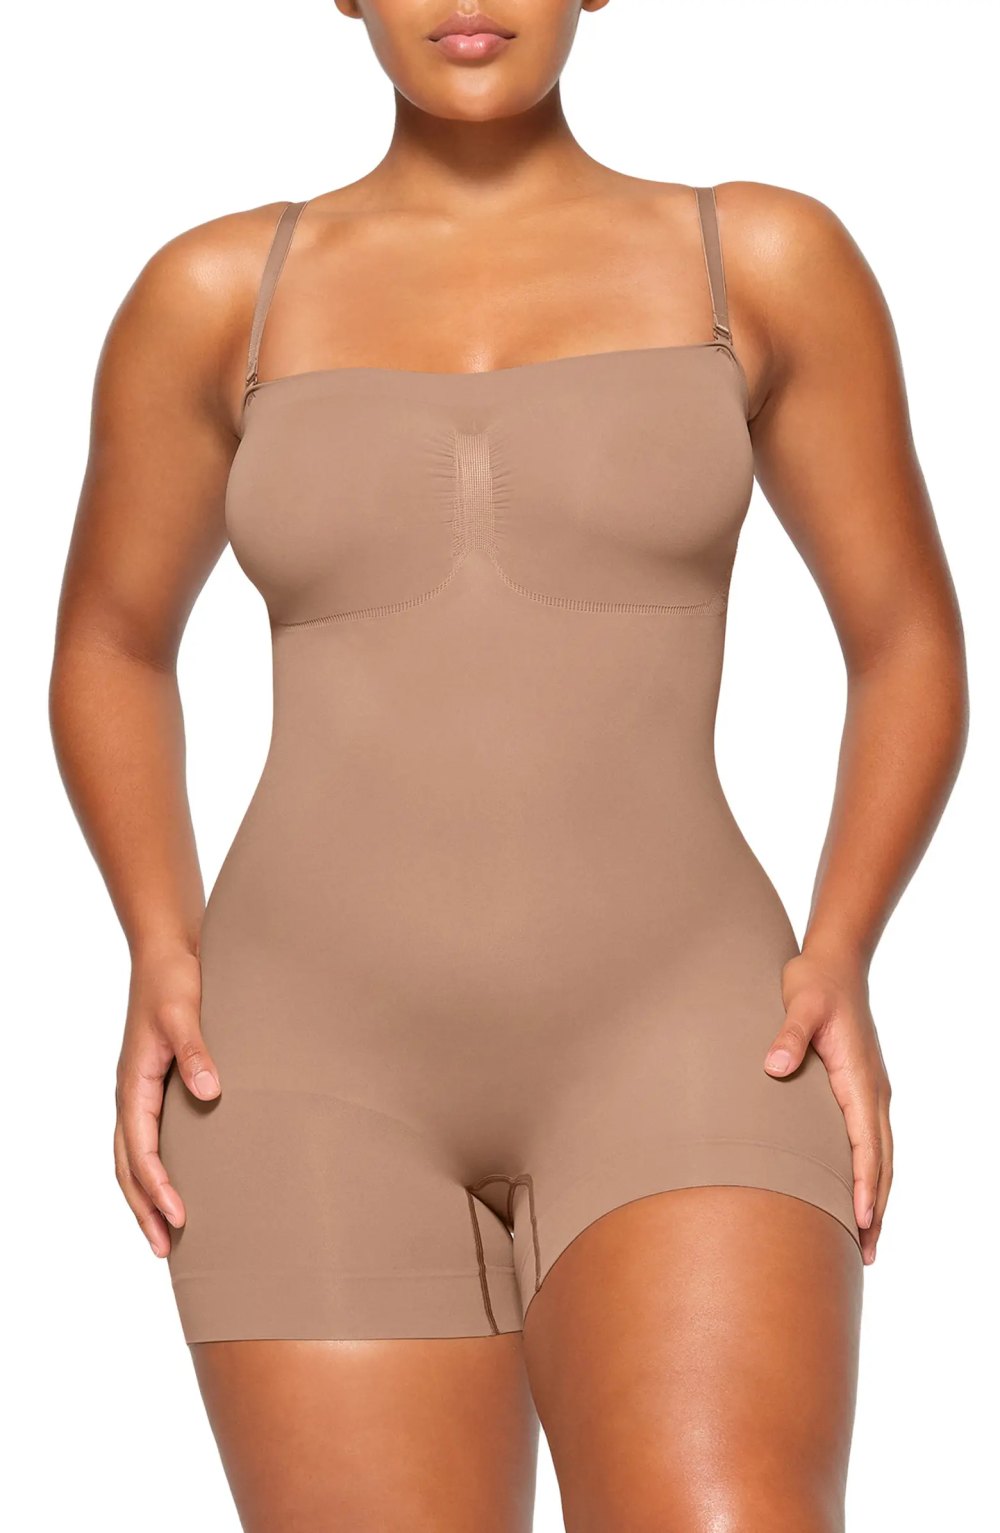 1000, Compression Bodysuit - Comfort for the Torso and Arms – Wear